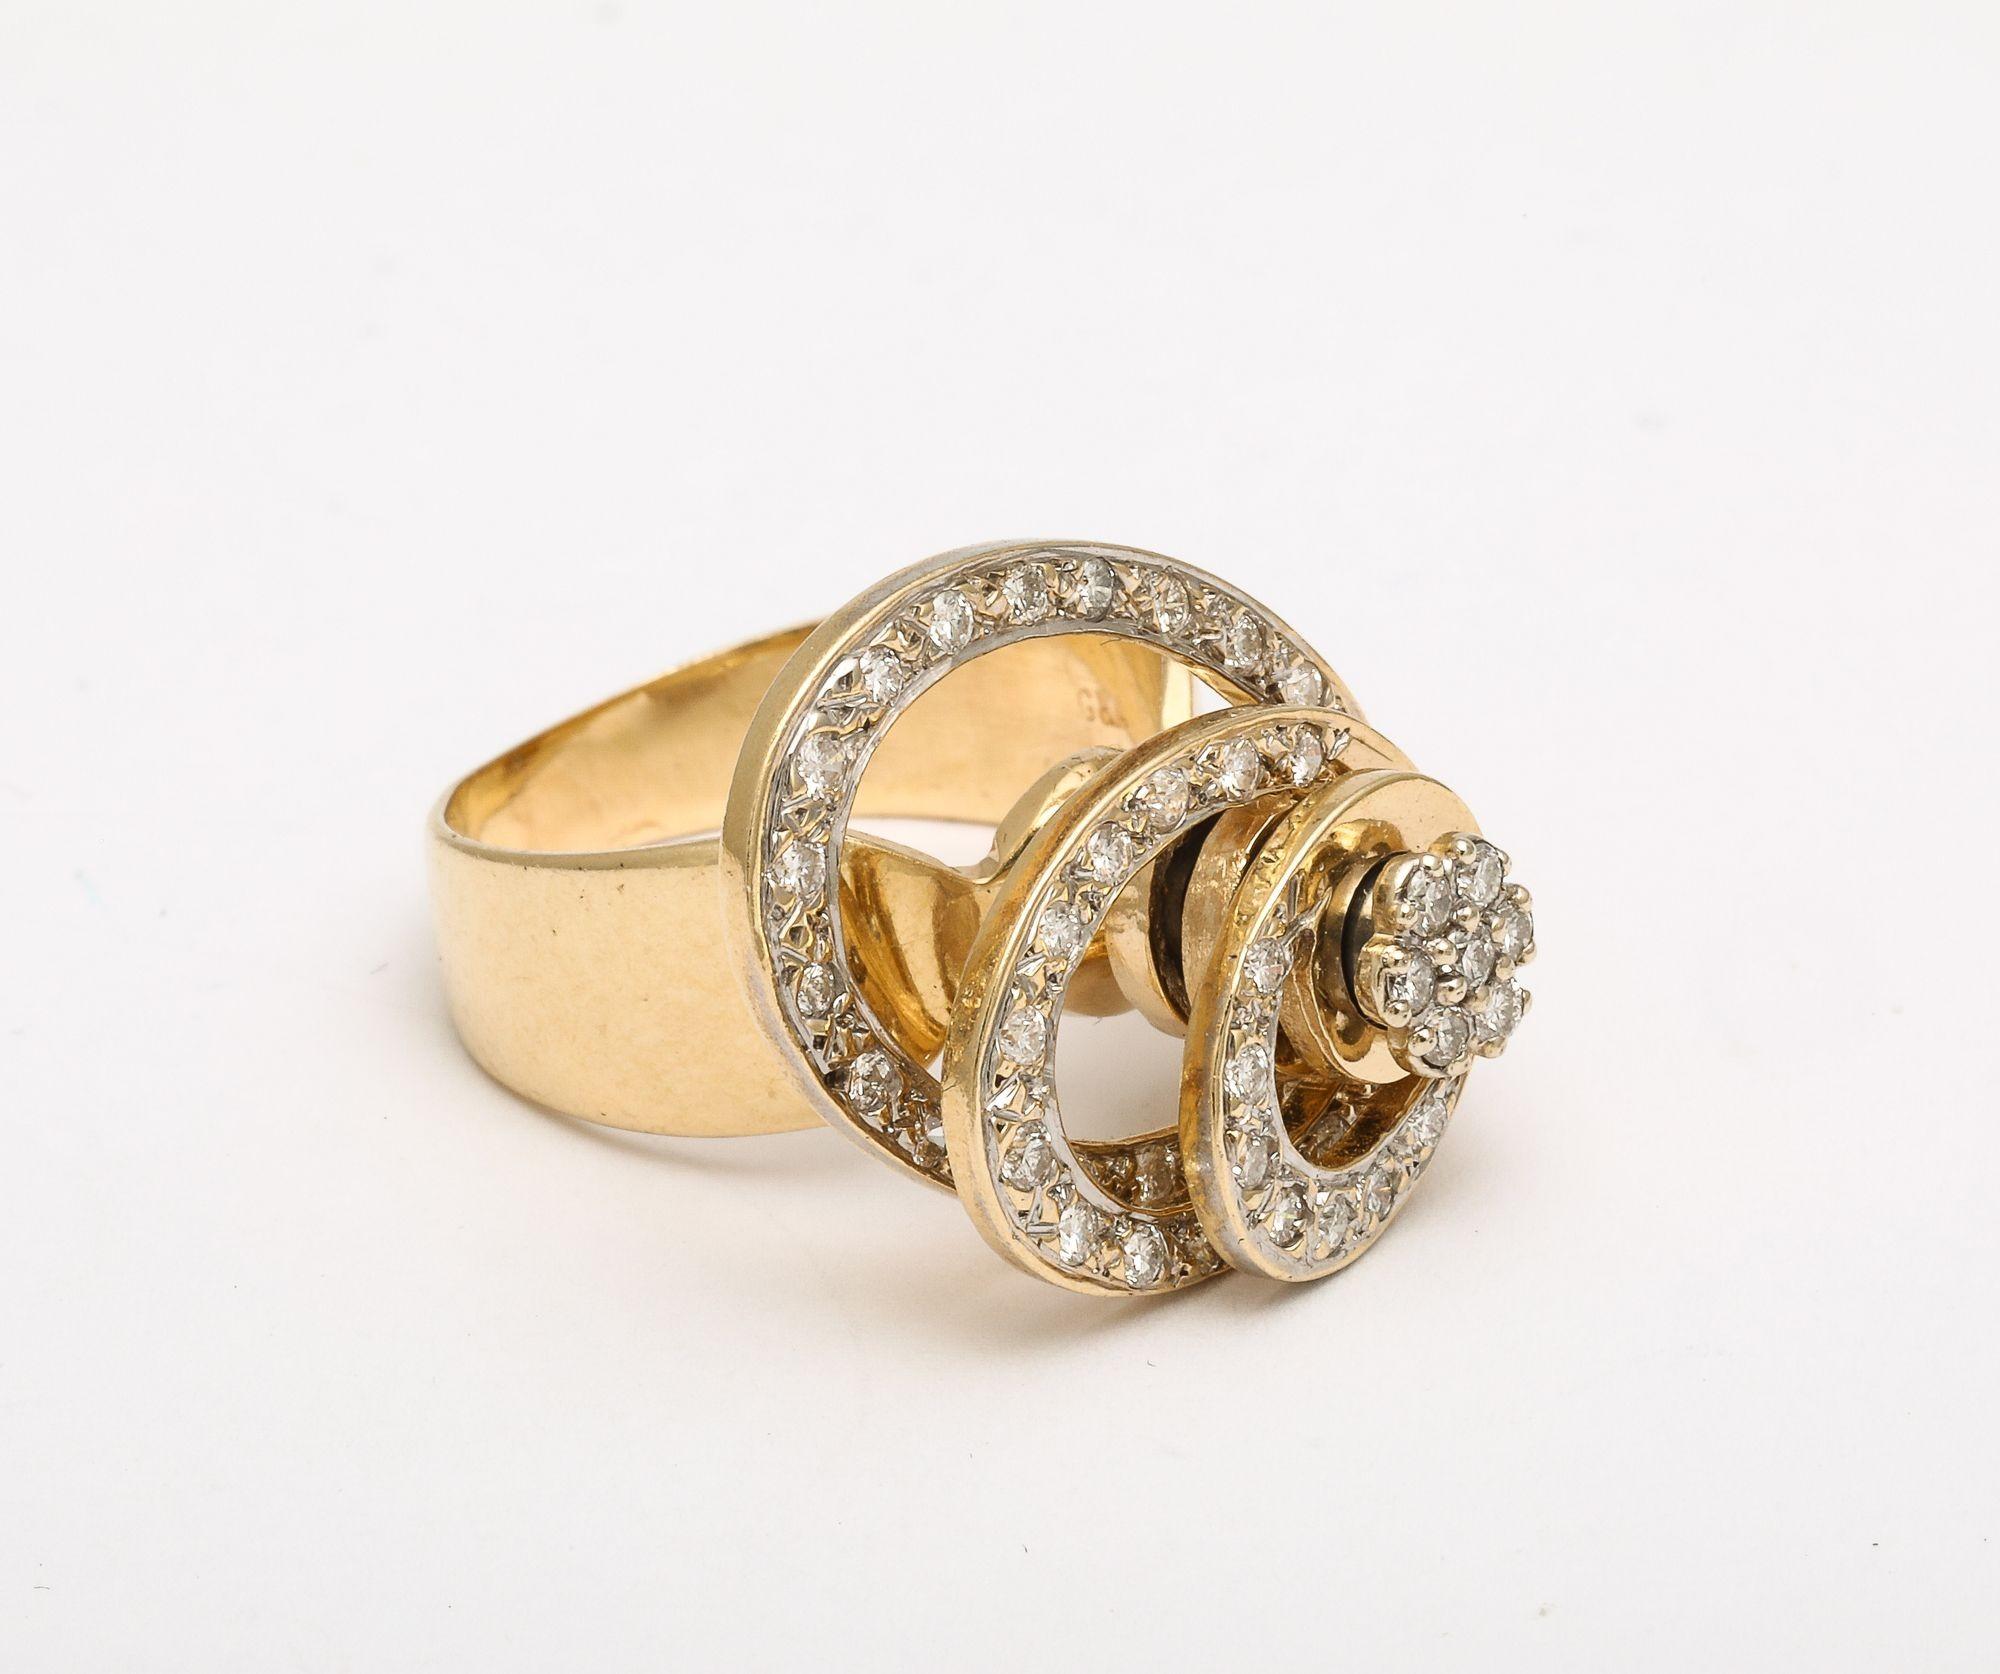 A wonderful Kinetic Diamond and 14 k Gold Spinner Ring. Concentric circles of set diamonds revolve around a central pillar giving movement to a well designed interesting ring.